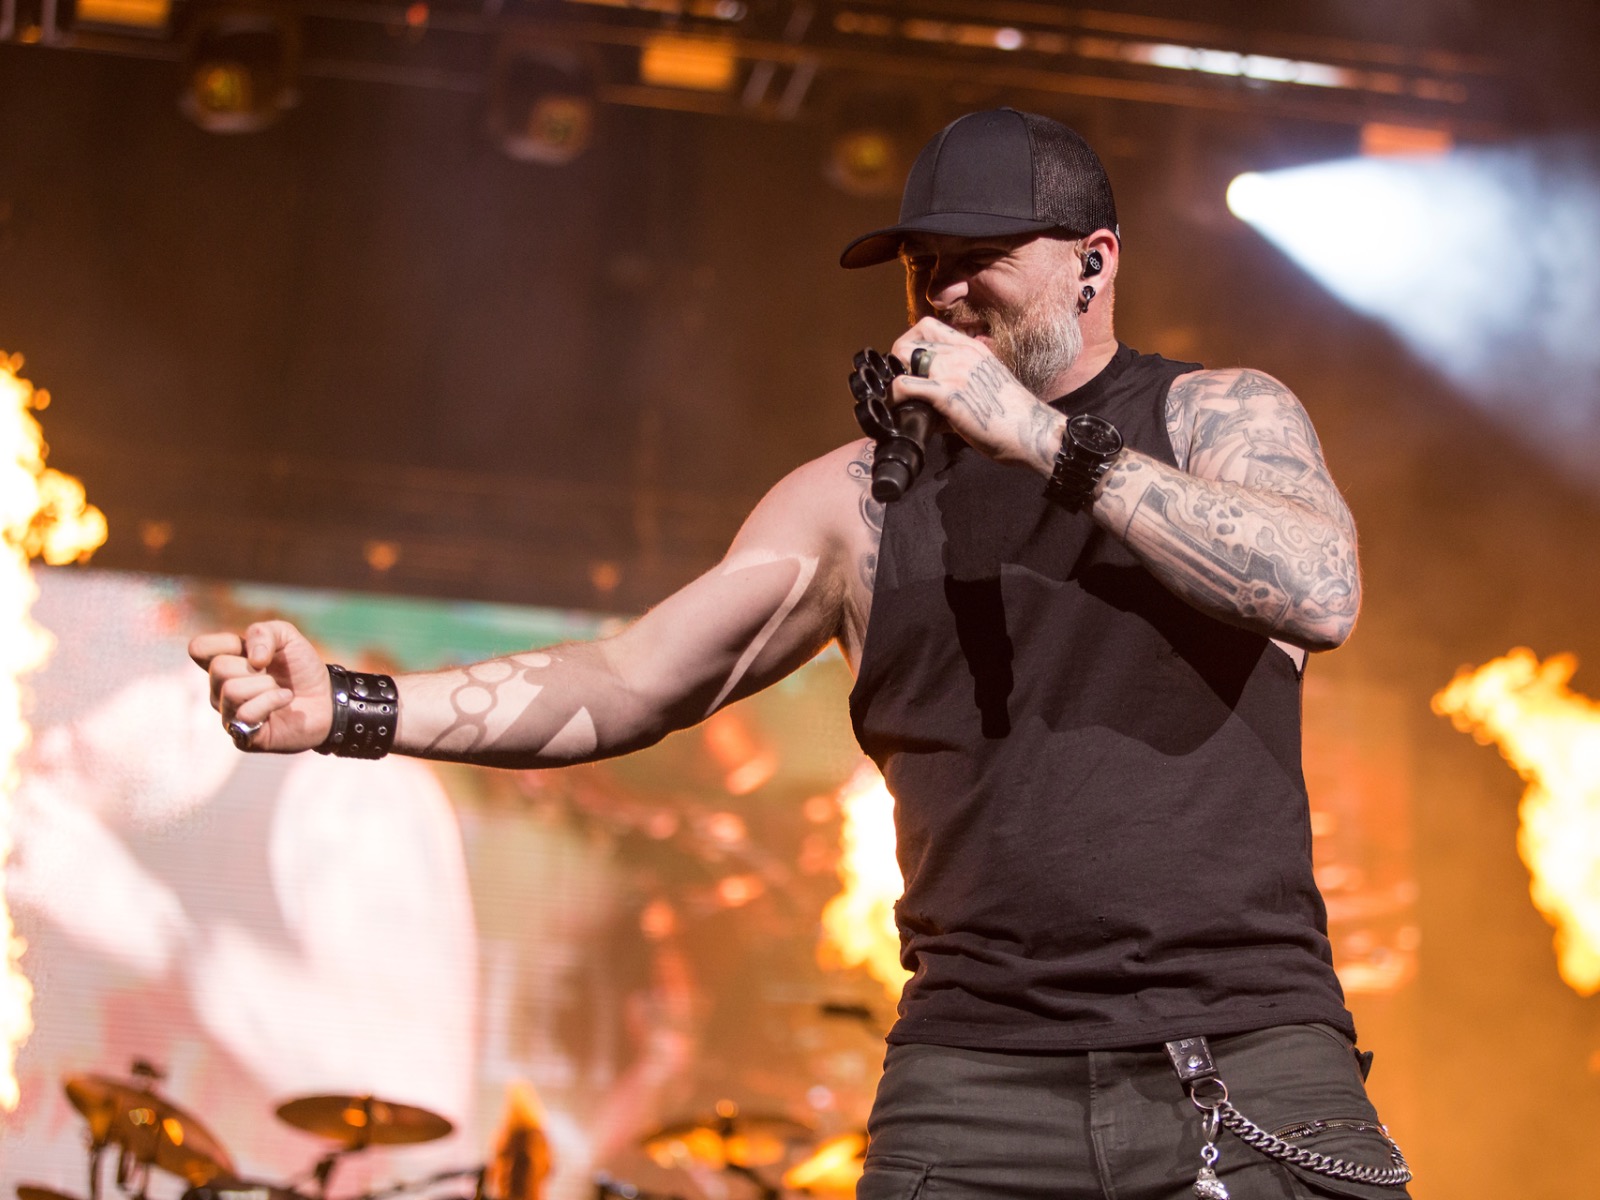 6 reasons you shouldn't have missed Brantley Gilbert's Fiserv